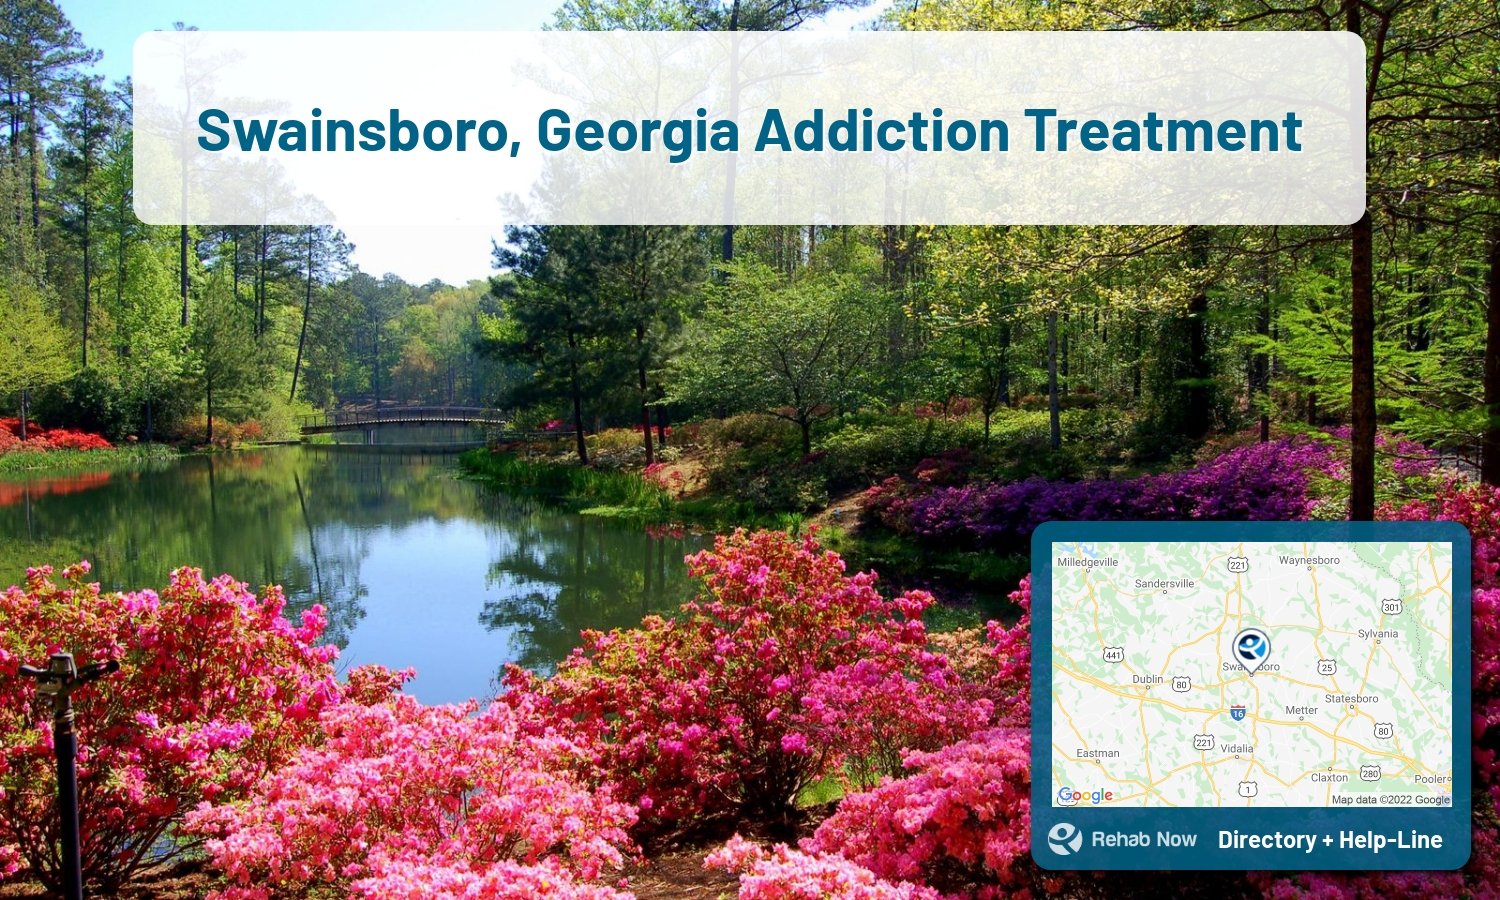 Swainsboro, GA Treatment Centers. Find drug rehab in Swainsboro, Georgia, or detox and treatment programs. Get the right help now!